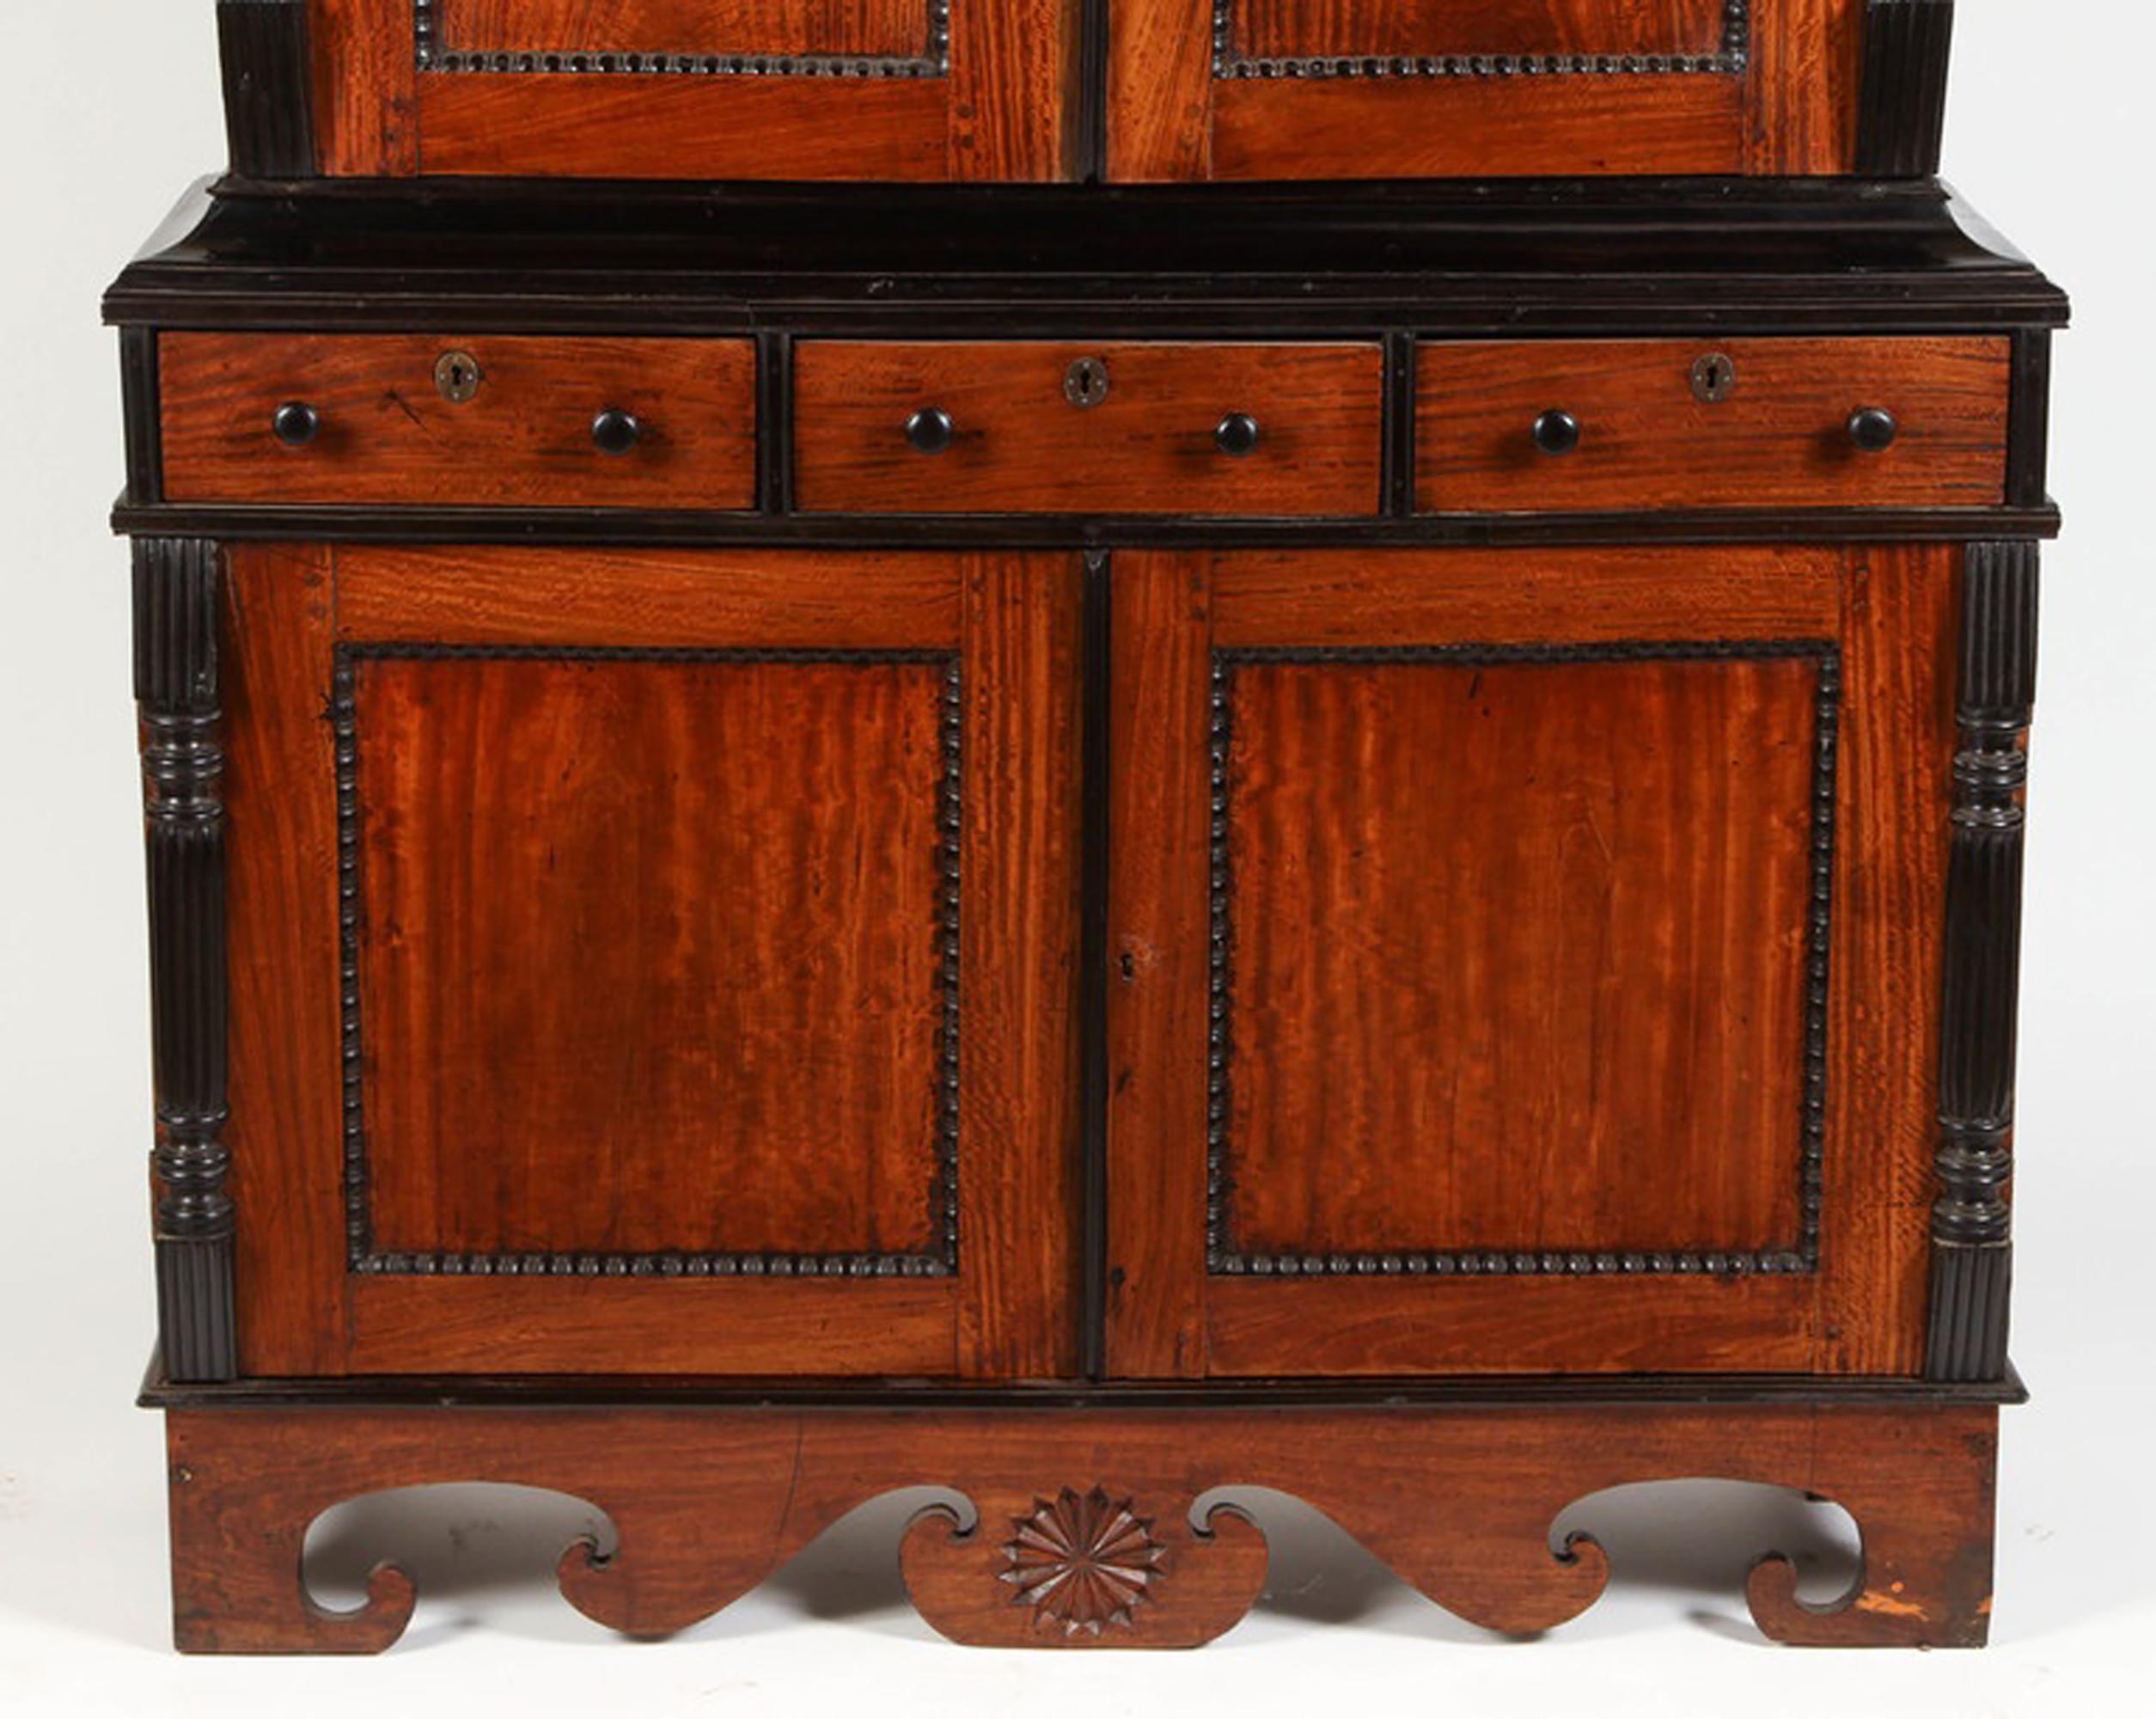 19th Century British Colonial Ceylonese Satinwood and Ebony Cabinet For Sale 2